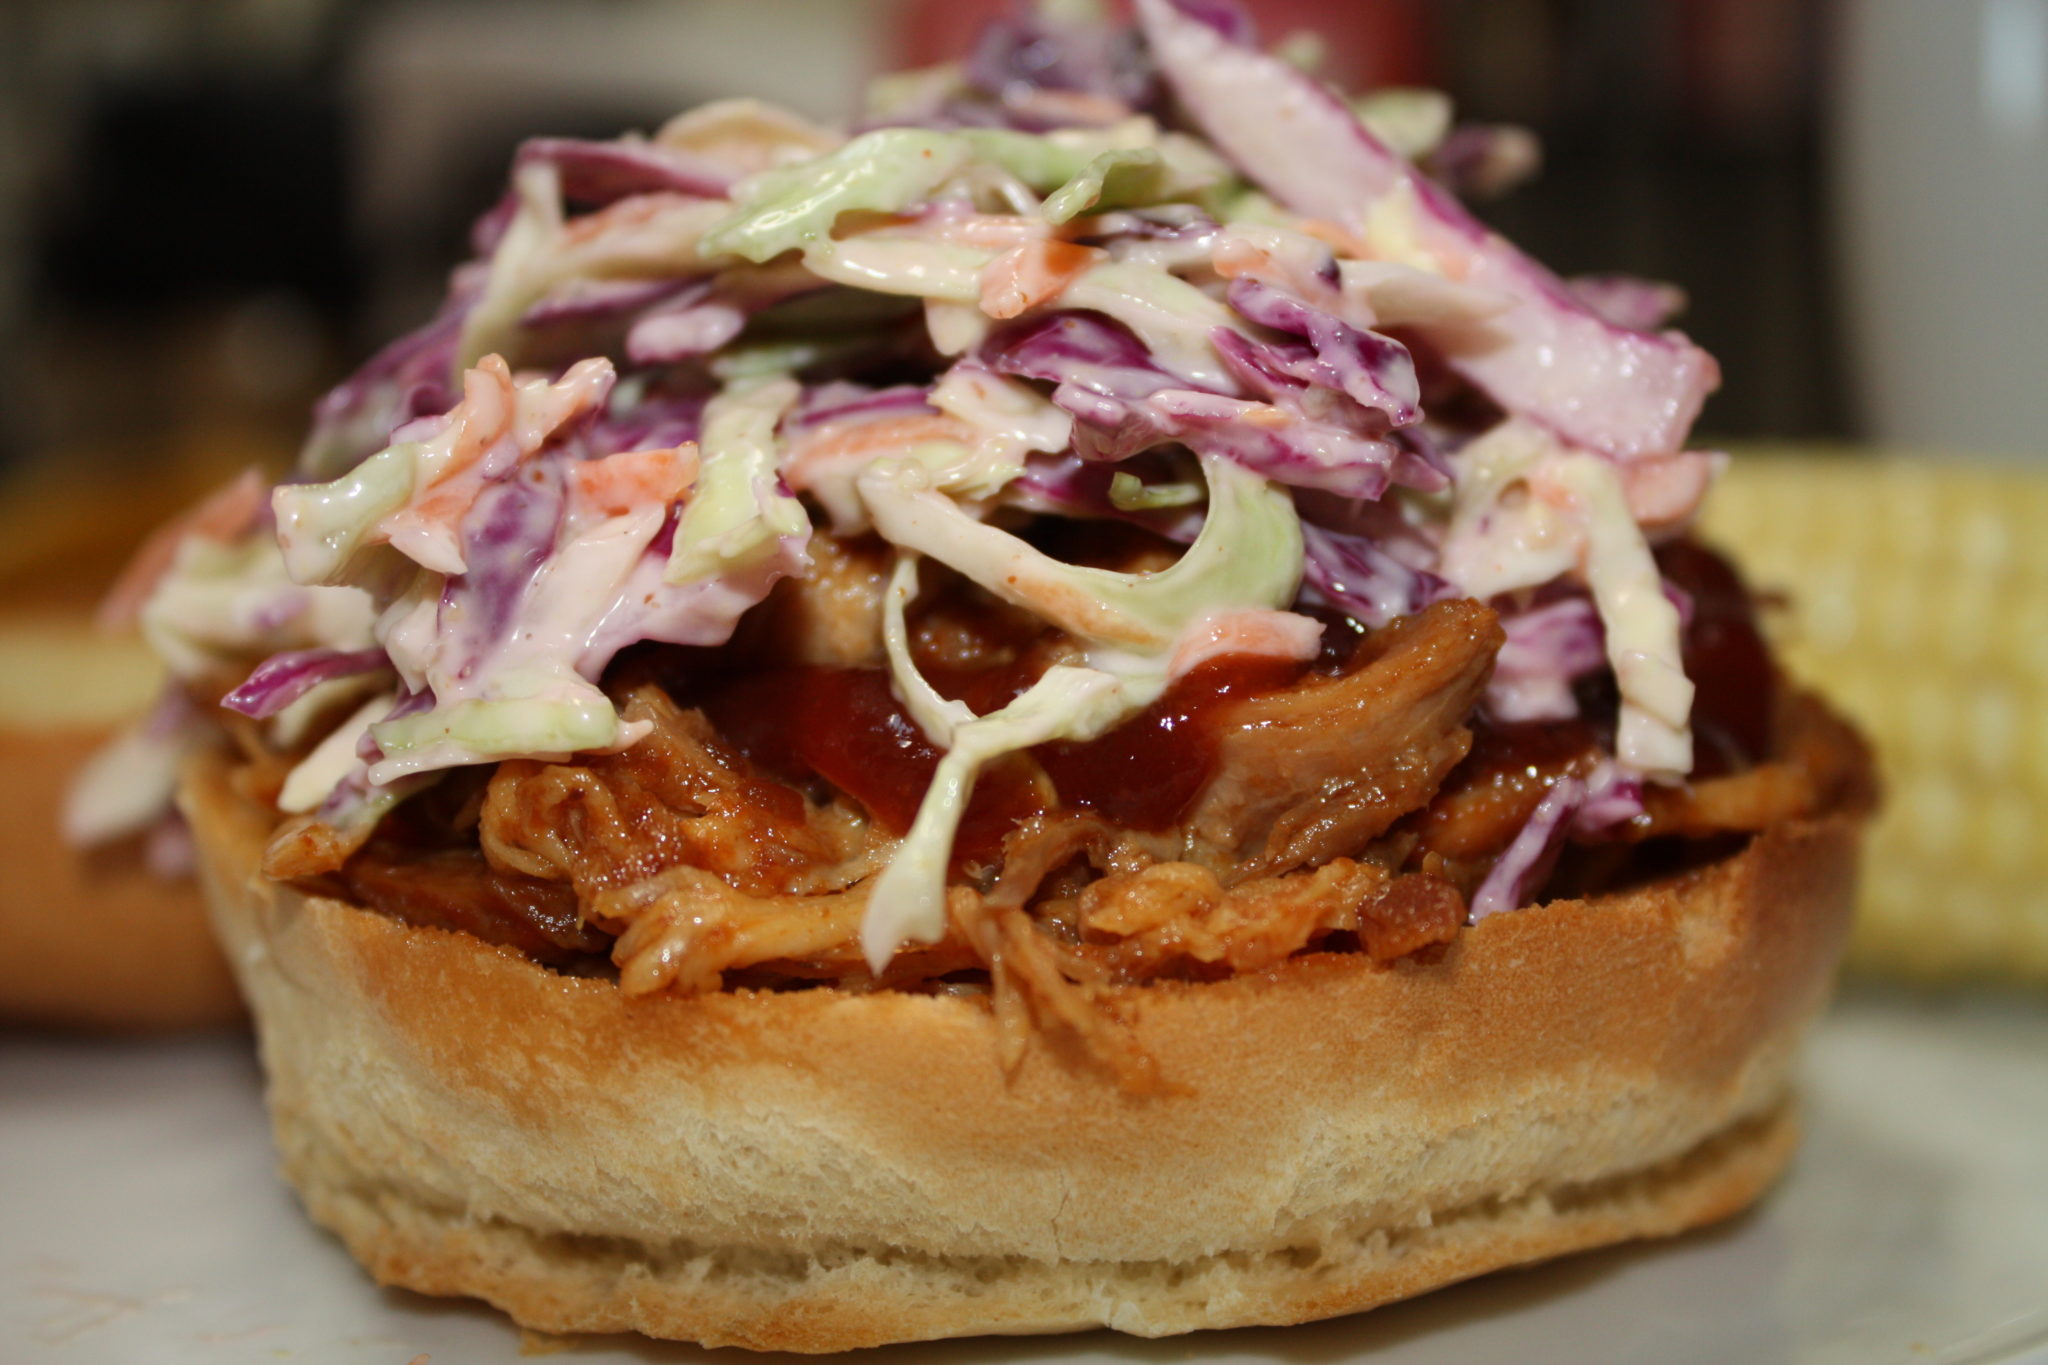 Pulled Pork Sandwiches & Homemade Cole Slaw